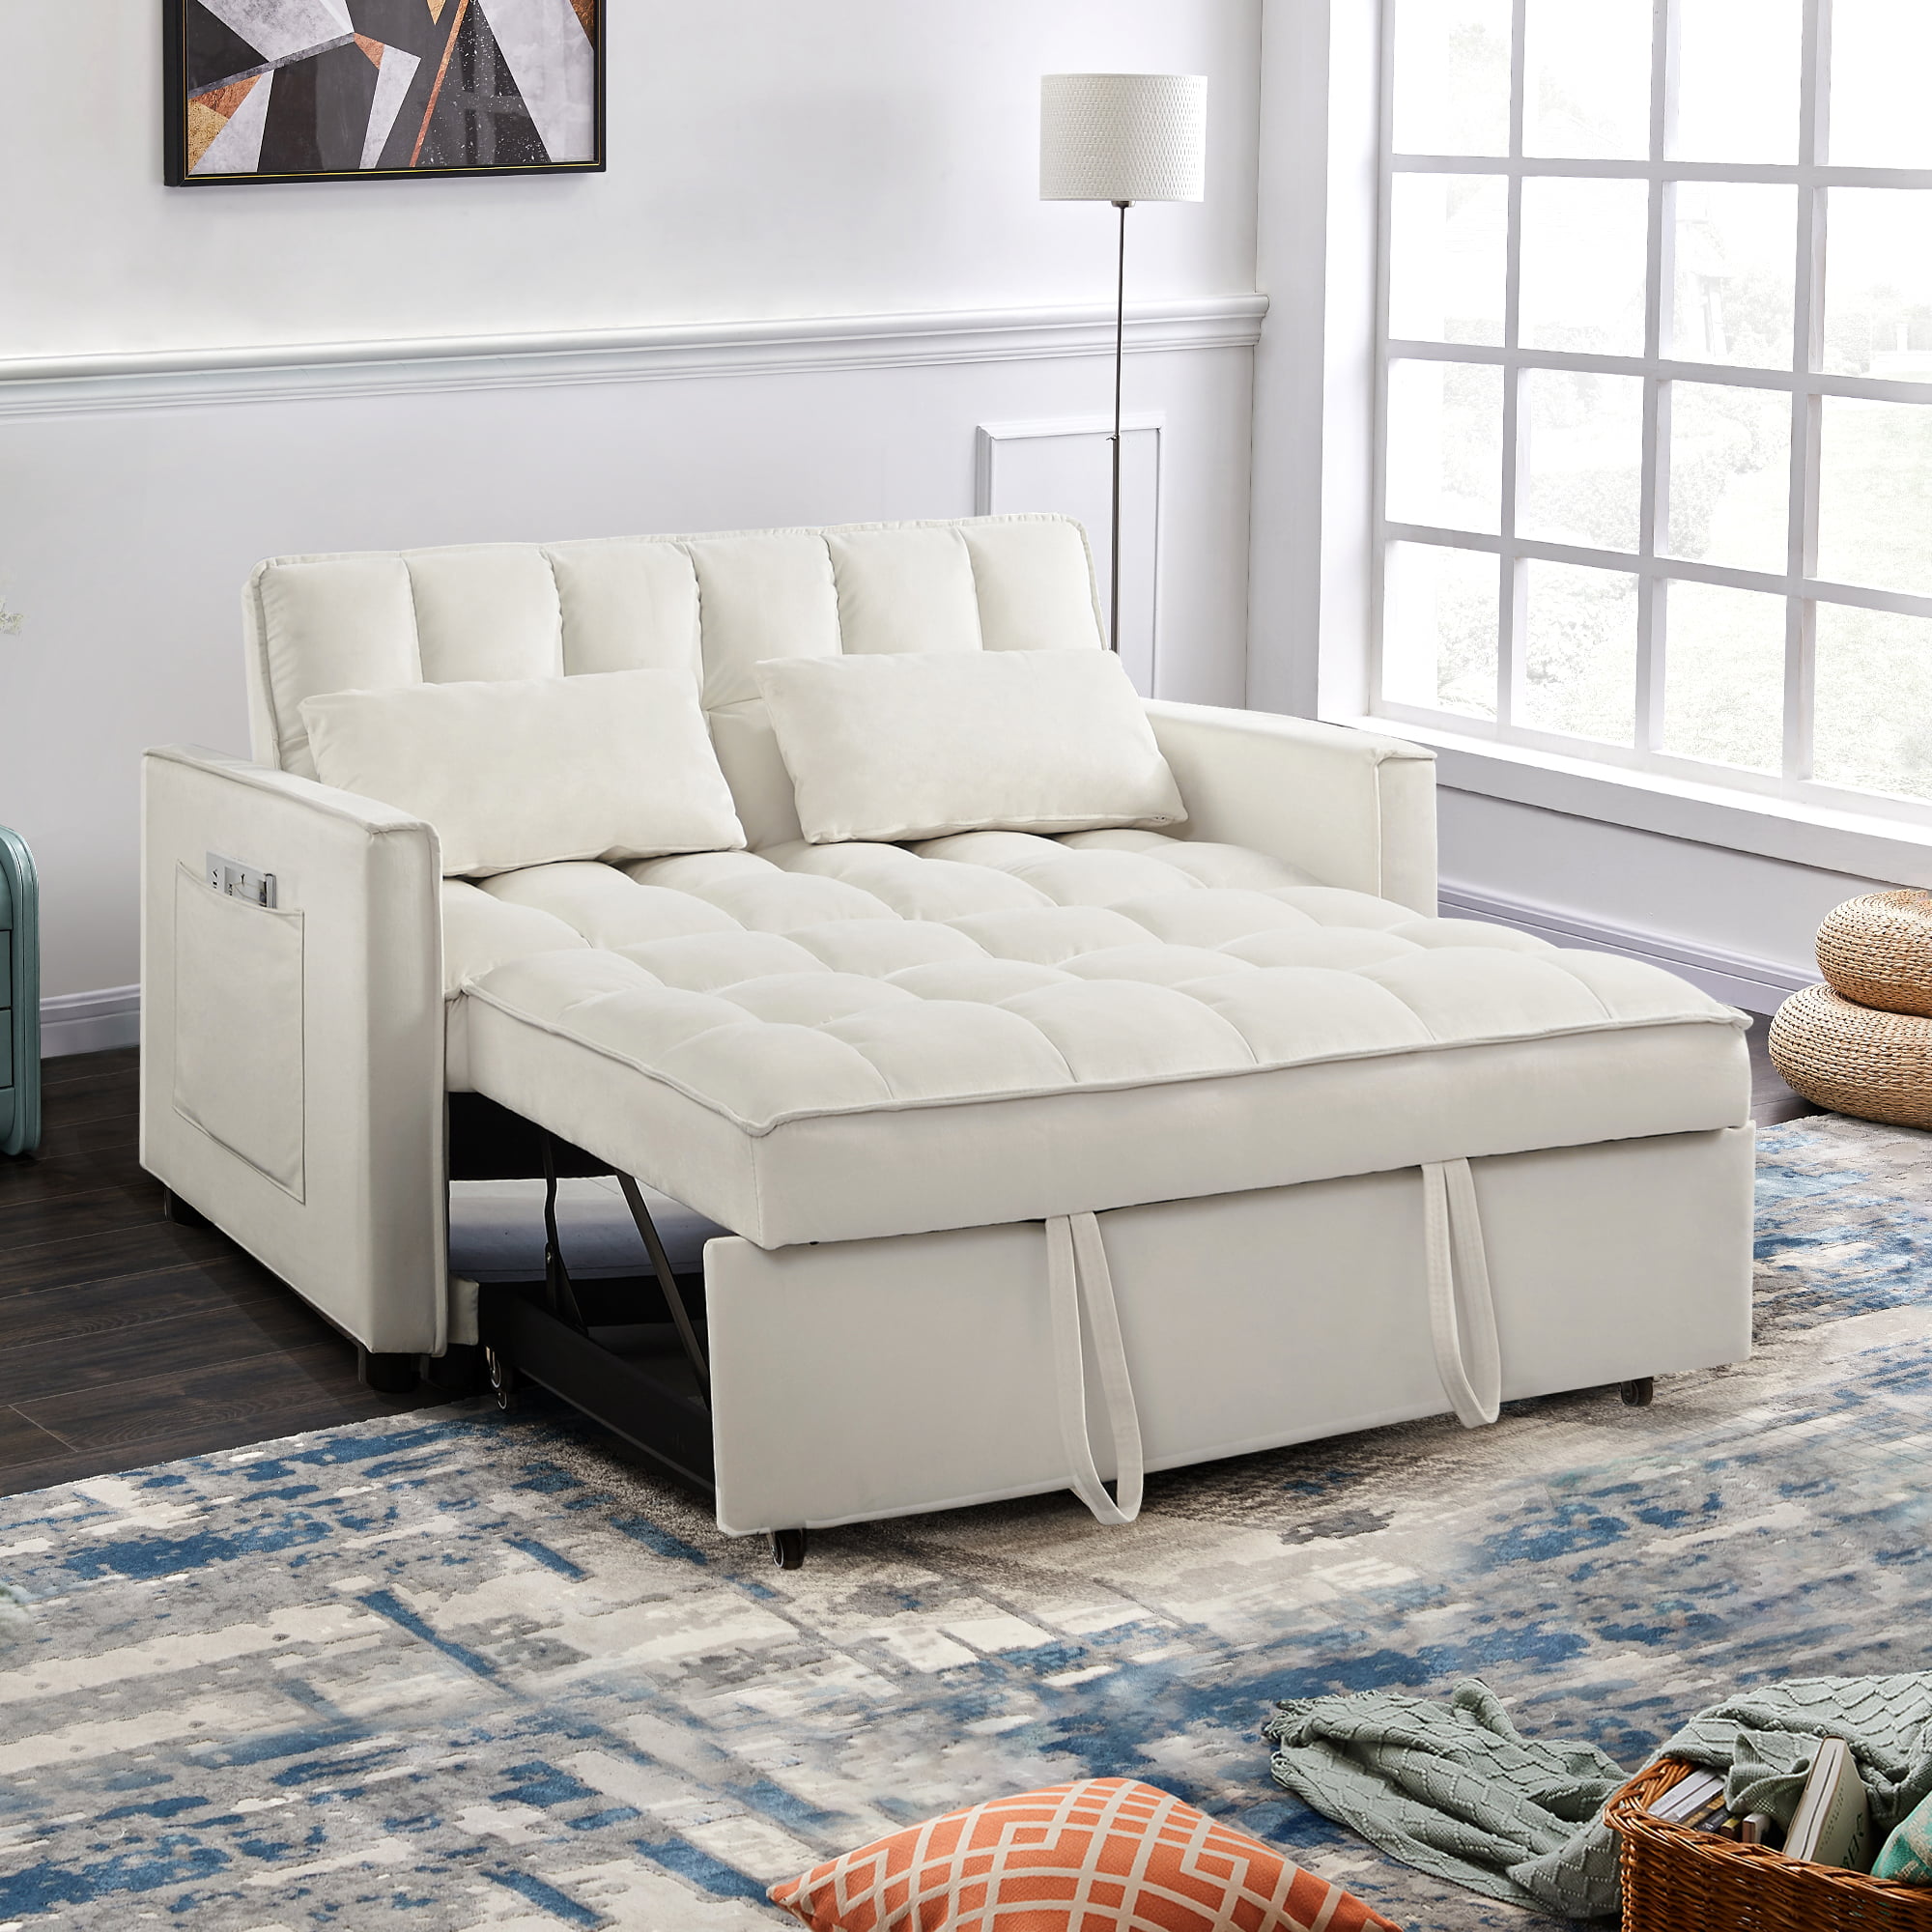 Sprællemand cyklus amerikansk dollar Muumblus 55.5" Convertible Futon Sofa Bed, Small Space Loveseat Sleeper  with Pull Out Bed, Modern Velvet Sofa Couch for Living Room, Adjsutable  Backrest, White - Walmart.com